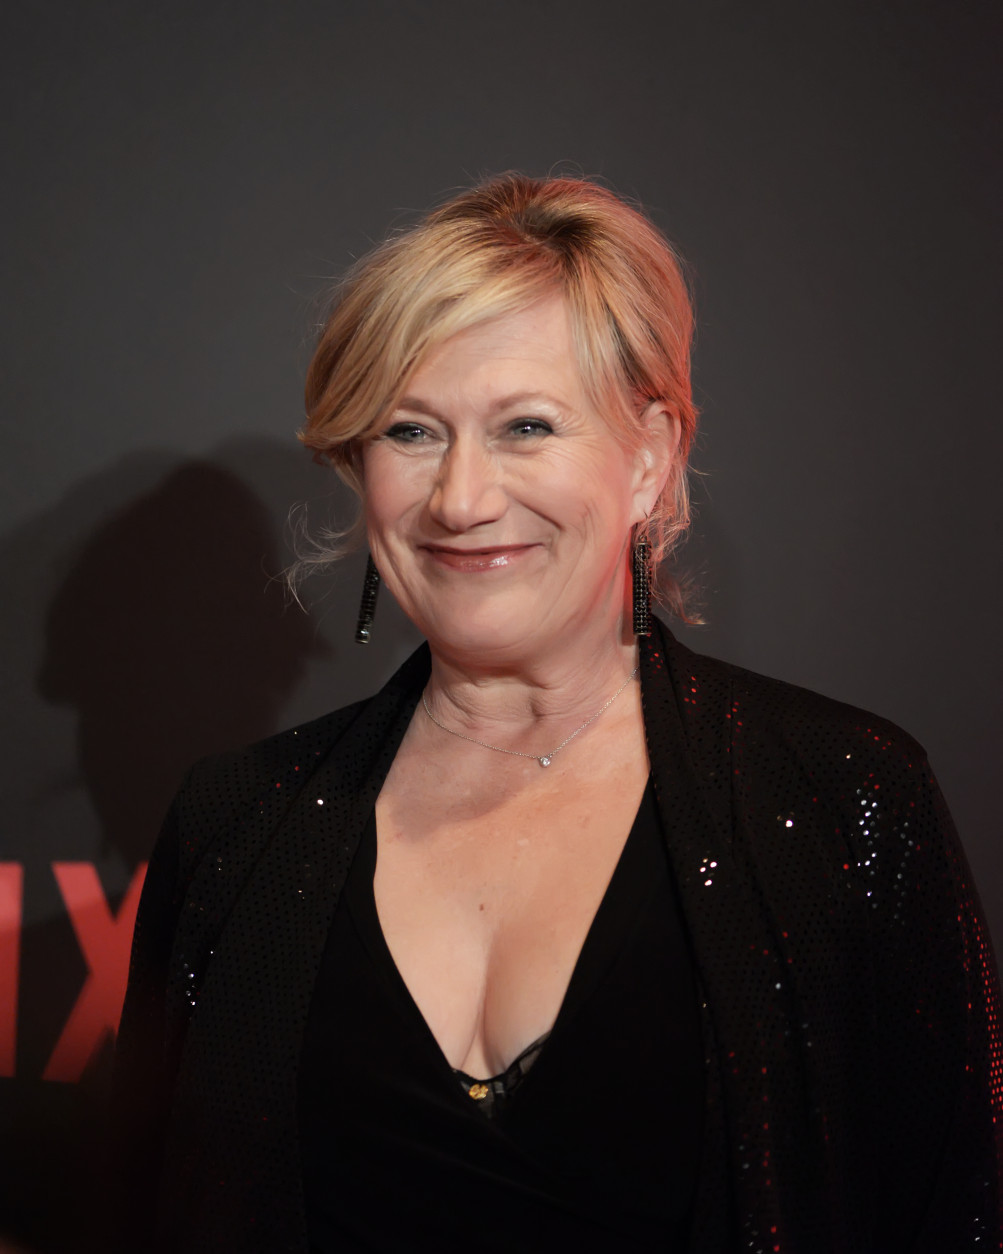 “House of Cards” cast member Jayne Atkinson at the National Portrait Gallery in D.C. on Feb. 22, 2016. (Courtesy Shannon Finney, www.shannonfinneyphotography.com)